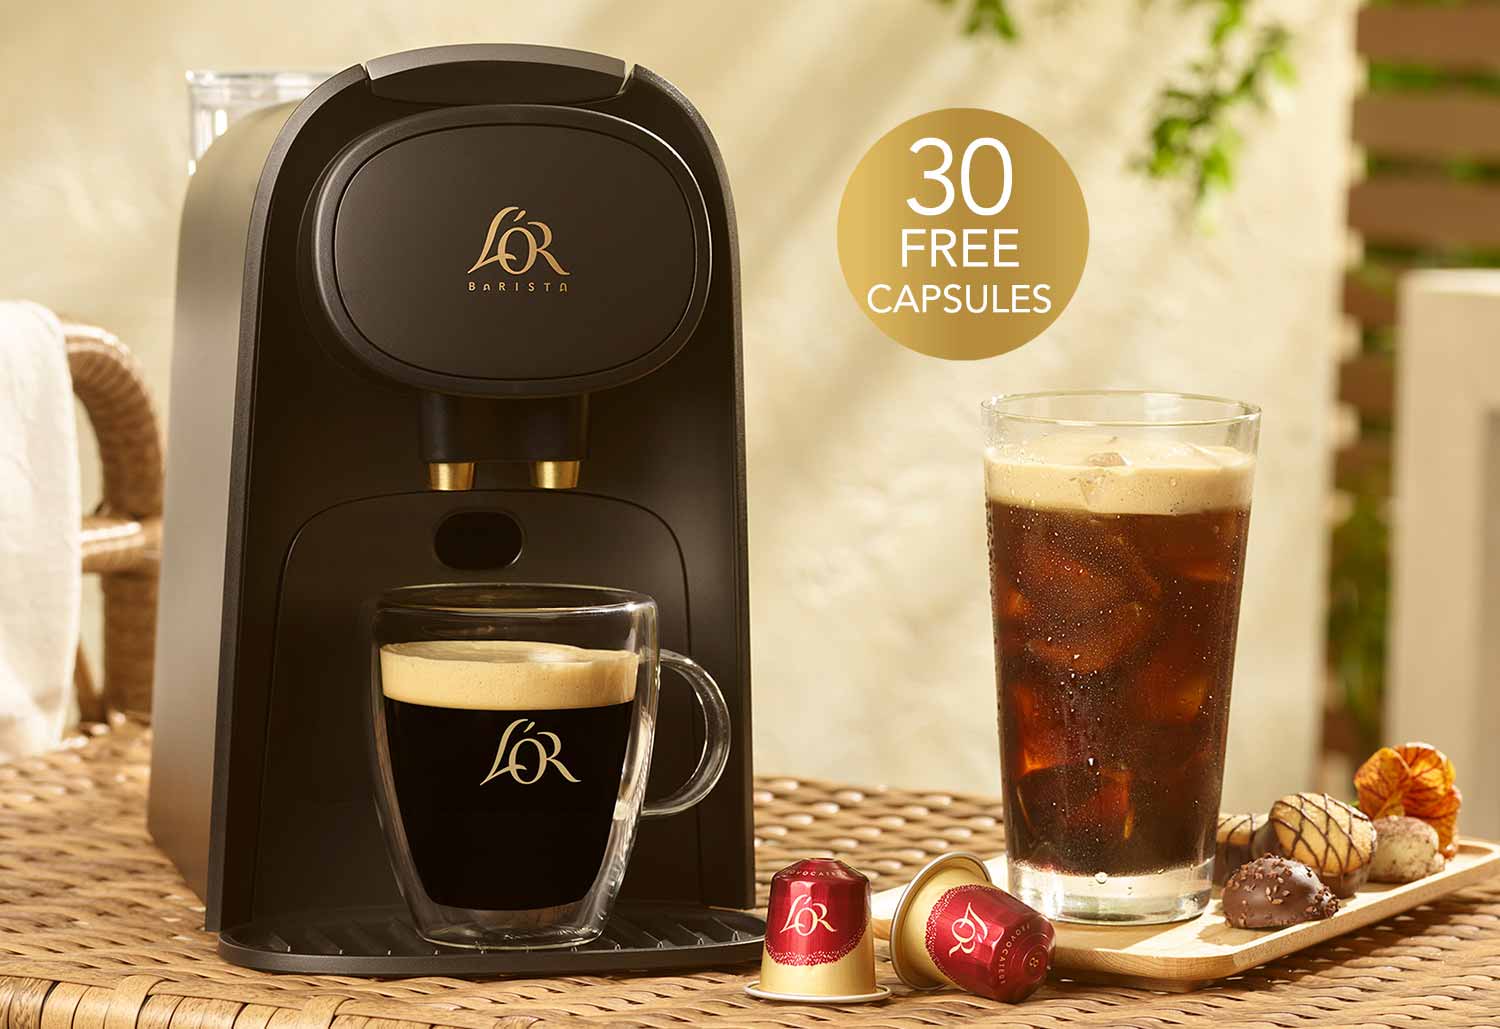 Image of the L'OR BARISTA System and Iced Coffee